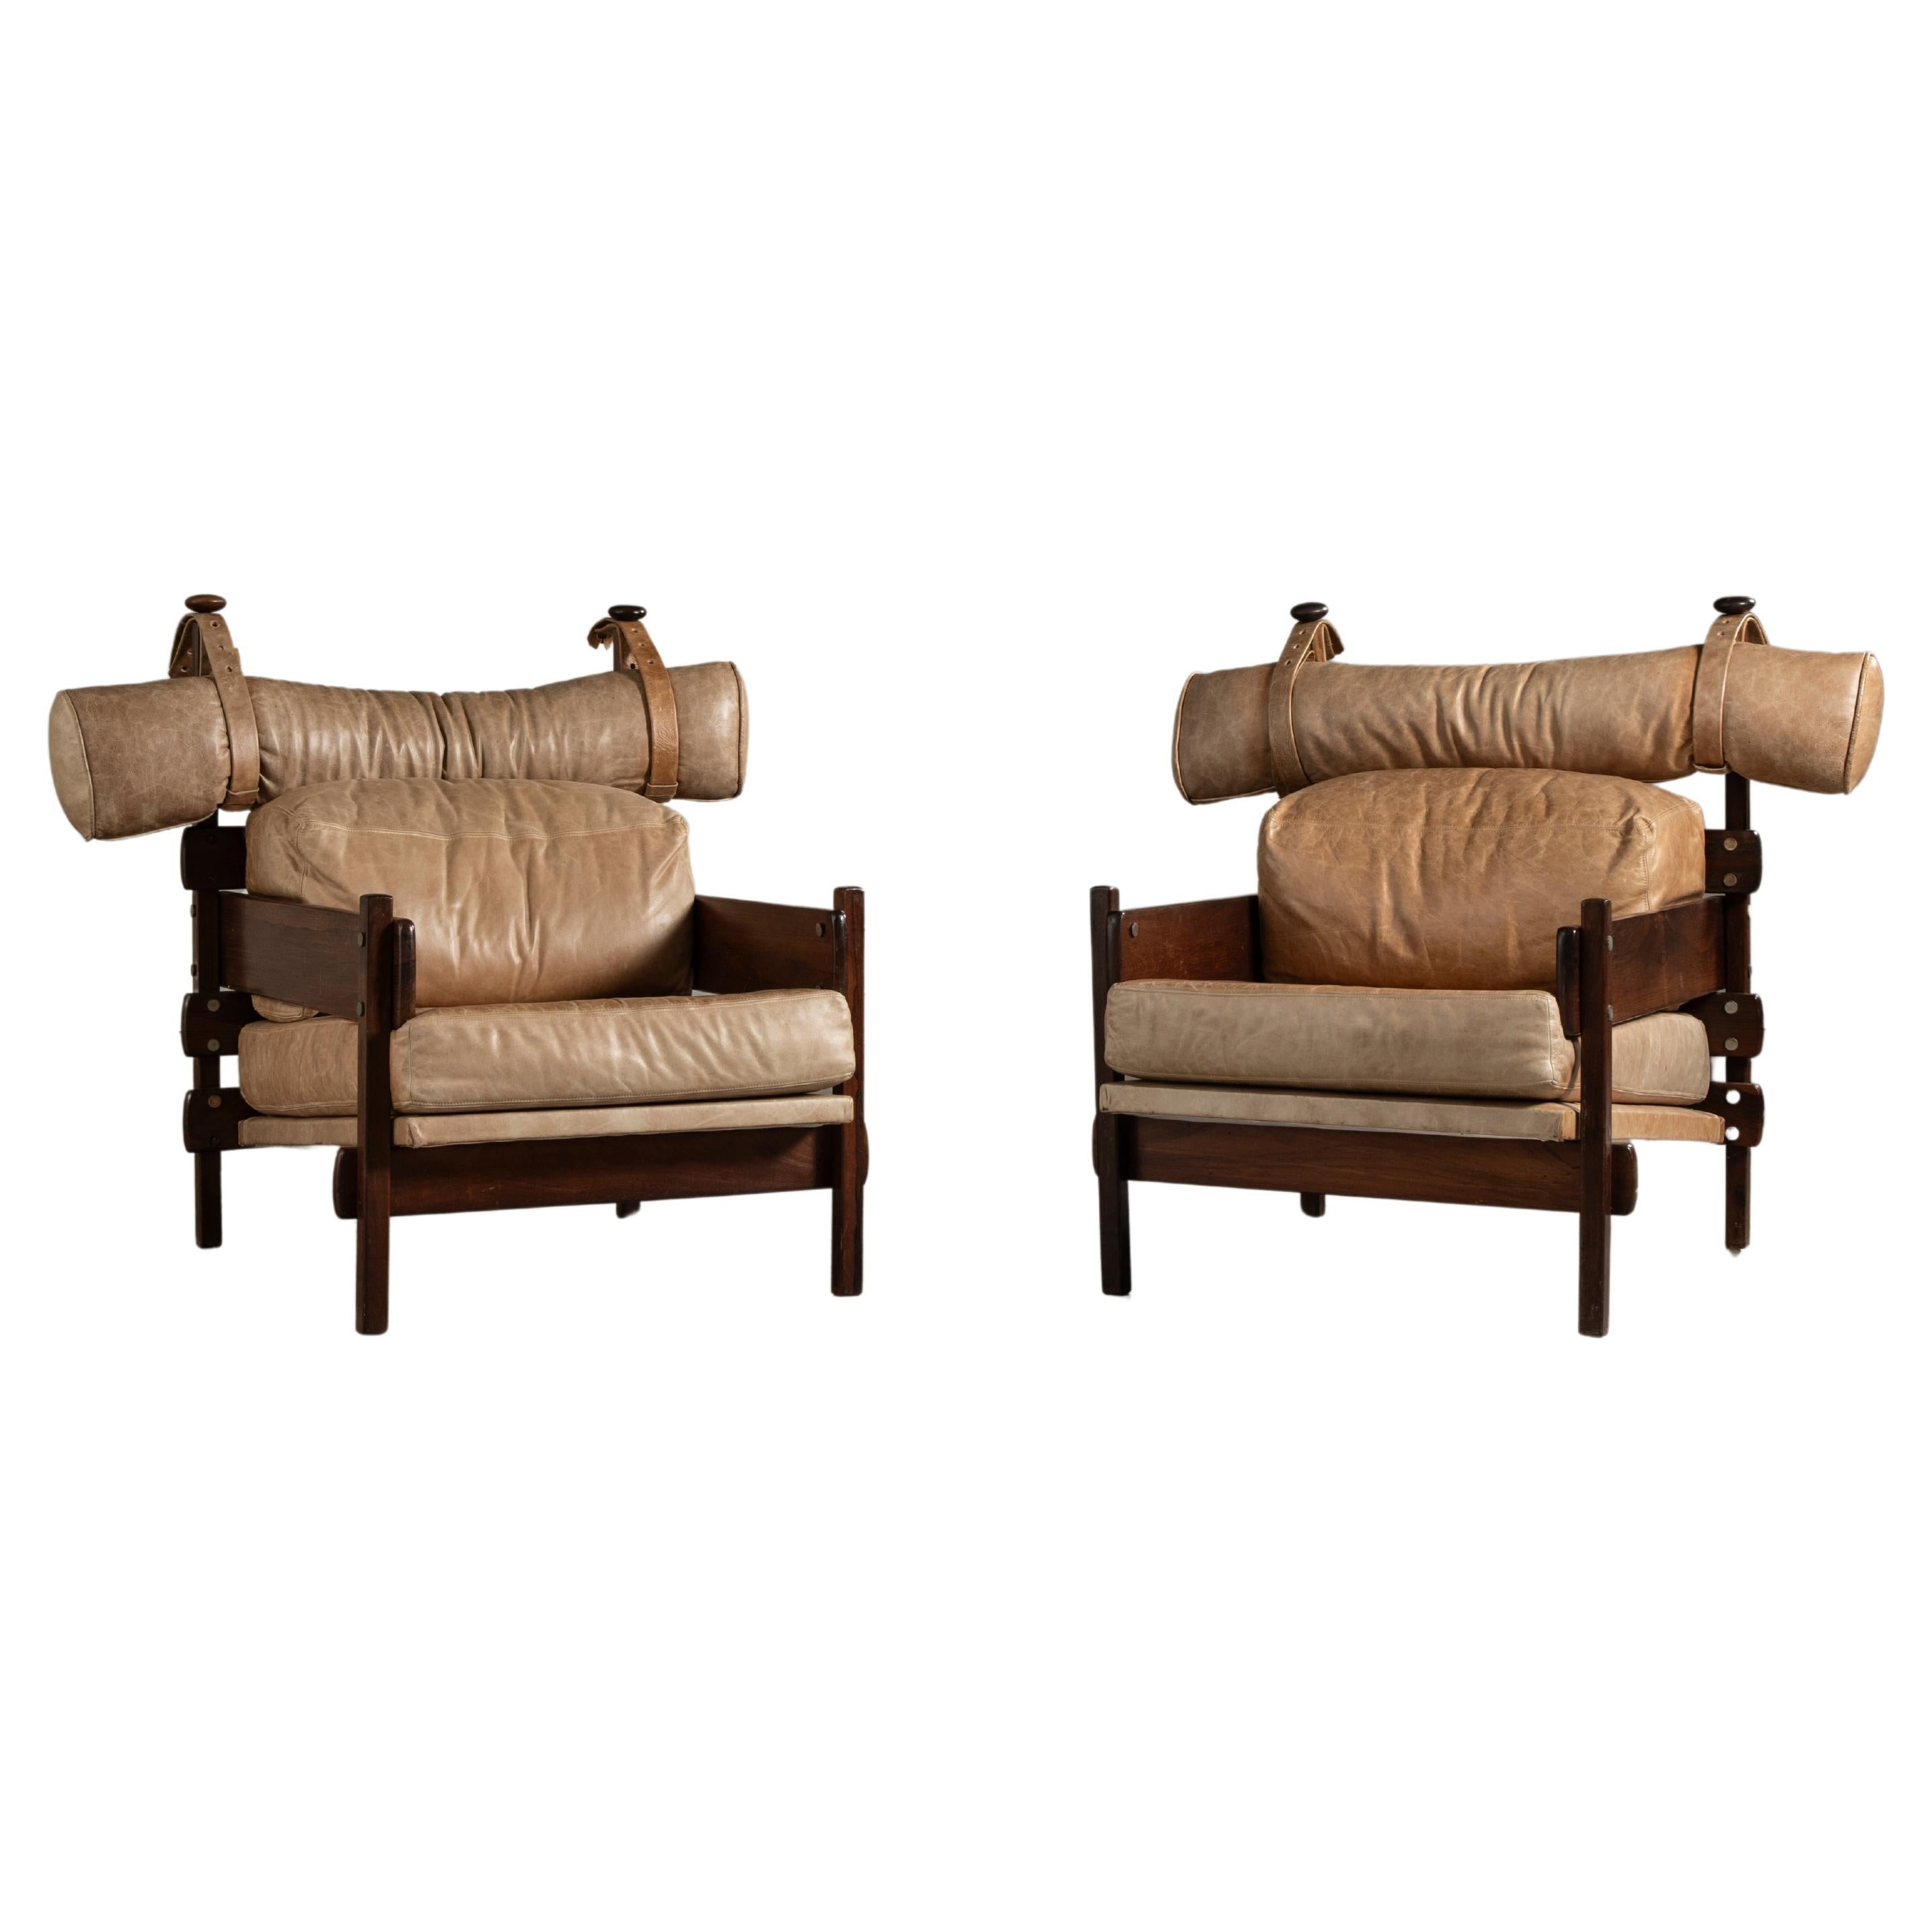 'Franco' Lounge Chairs with headrest, Sergio Rodrigues, Brazilian Modern Design For Sale